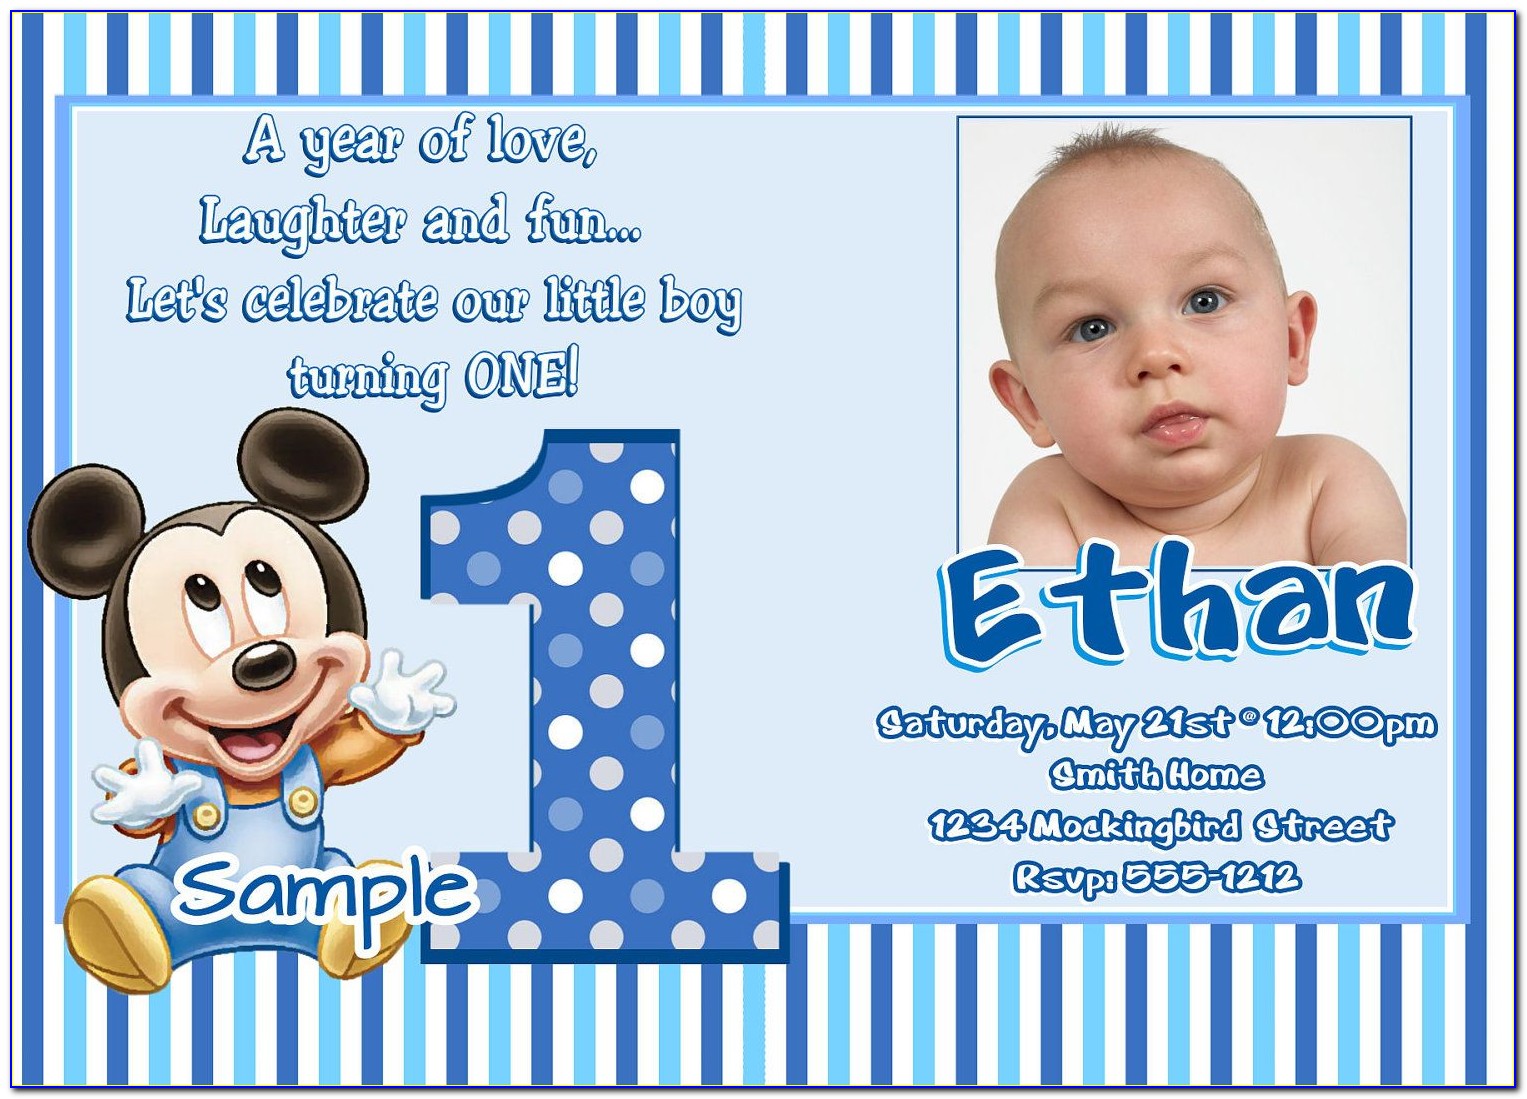 dog-birthday-party-invitations-templates-free-template-resume-examples-86o7gbm3ob